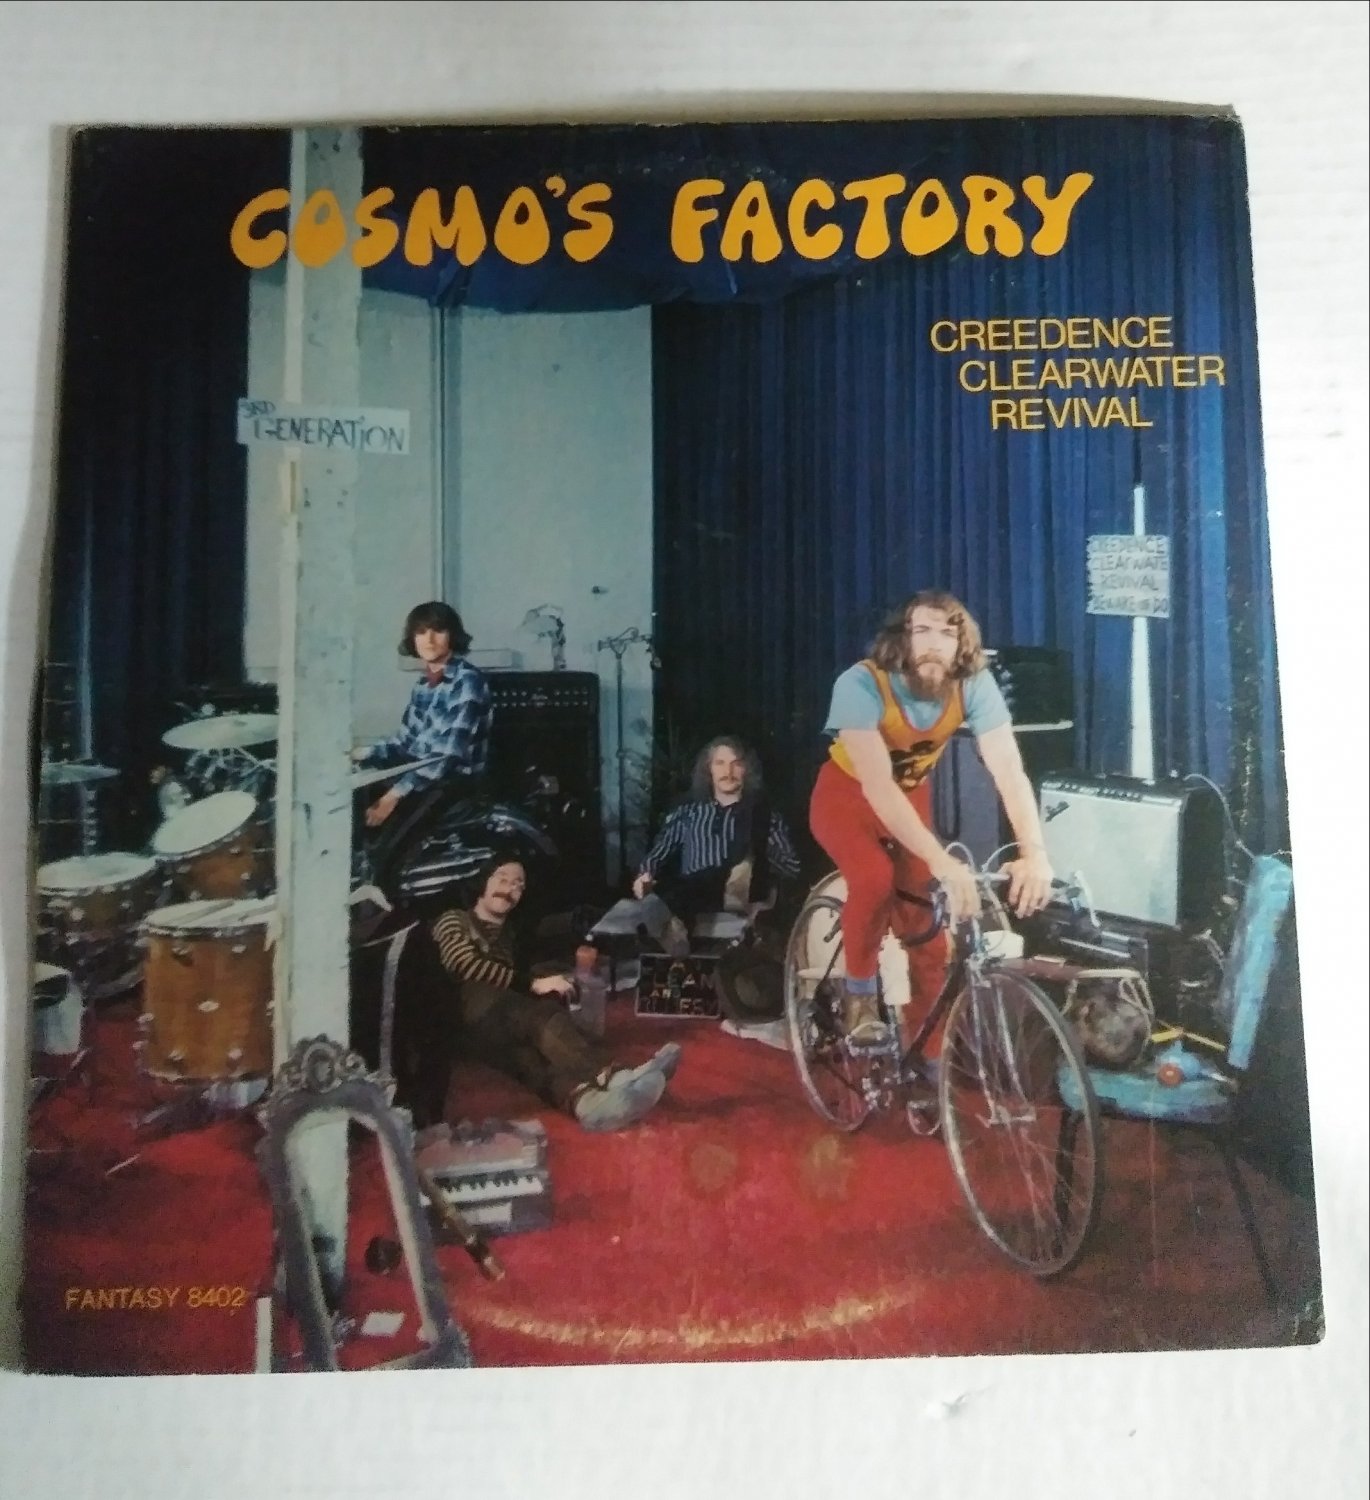 1970 Vintage Album CCR Cosmo's Factory LP Tested Creedence Clearwater Revival